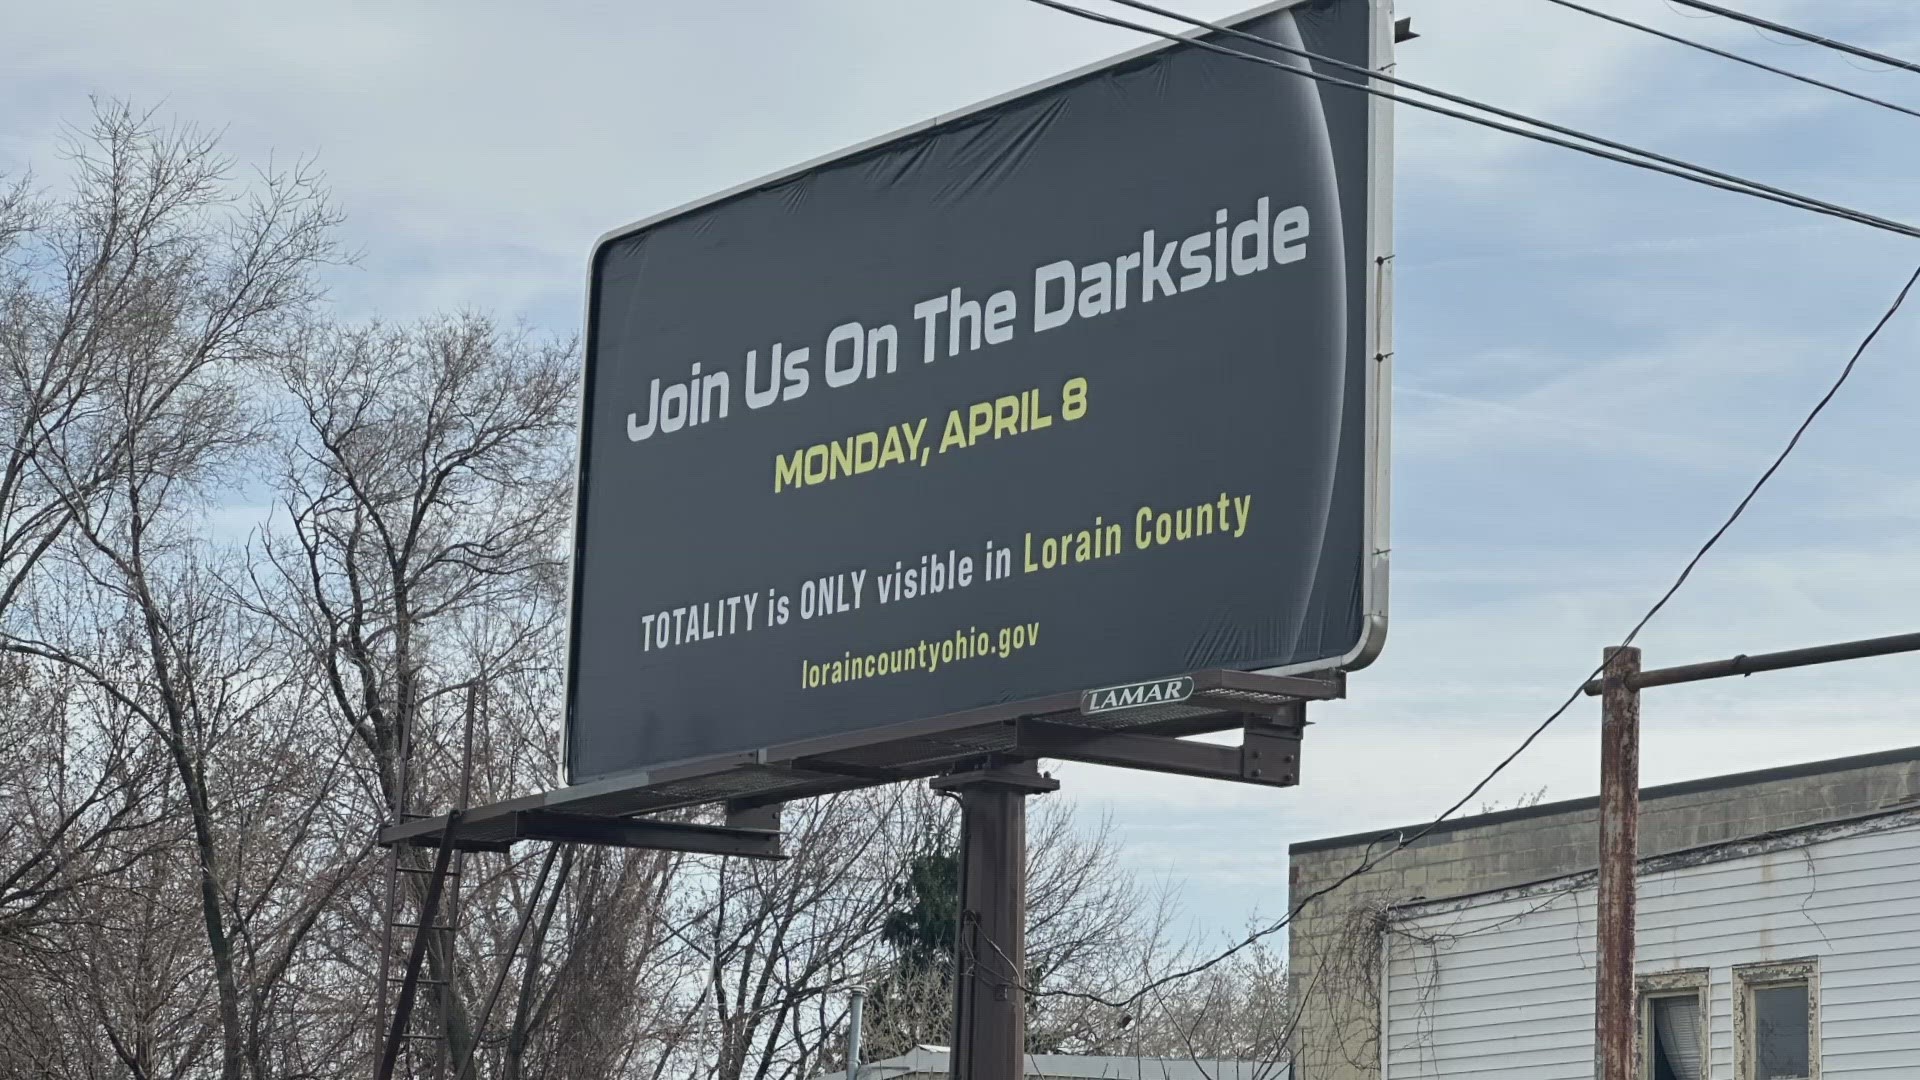 The Lorain County Visitors Bureau paid for the billboard that's located on St. Clair Avenue at East 43rd Street